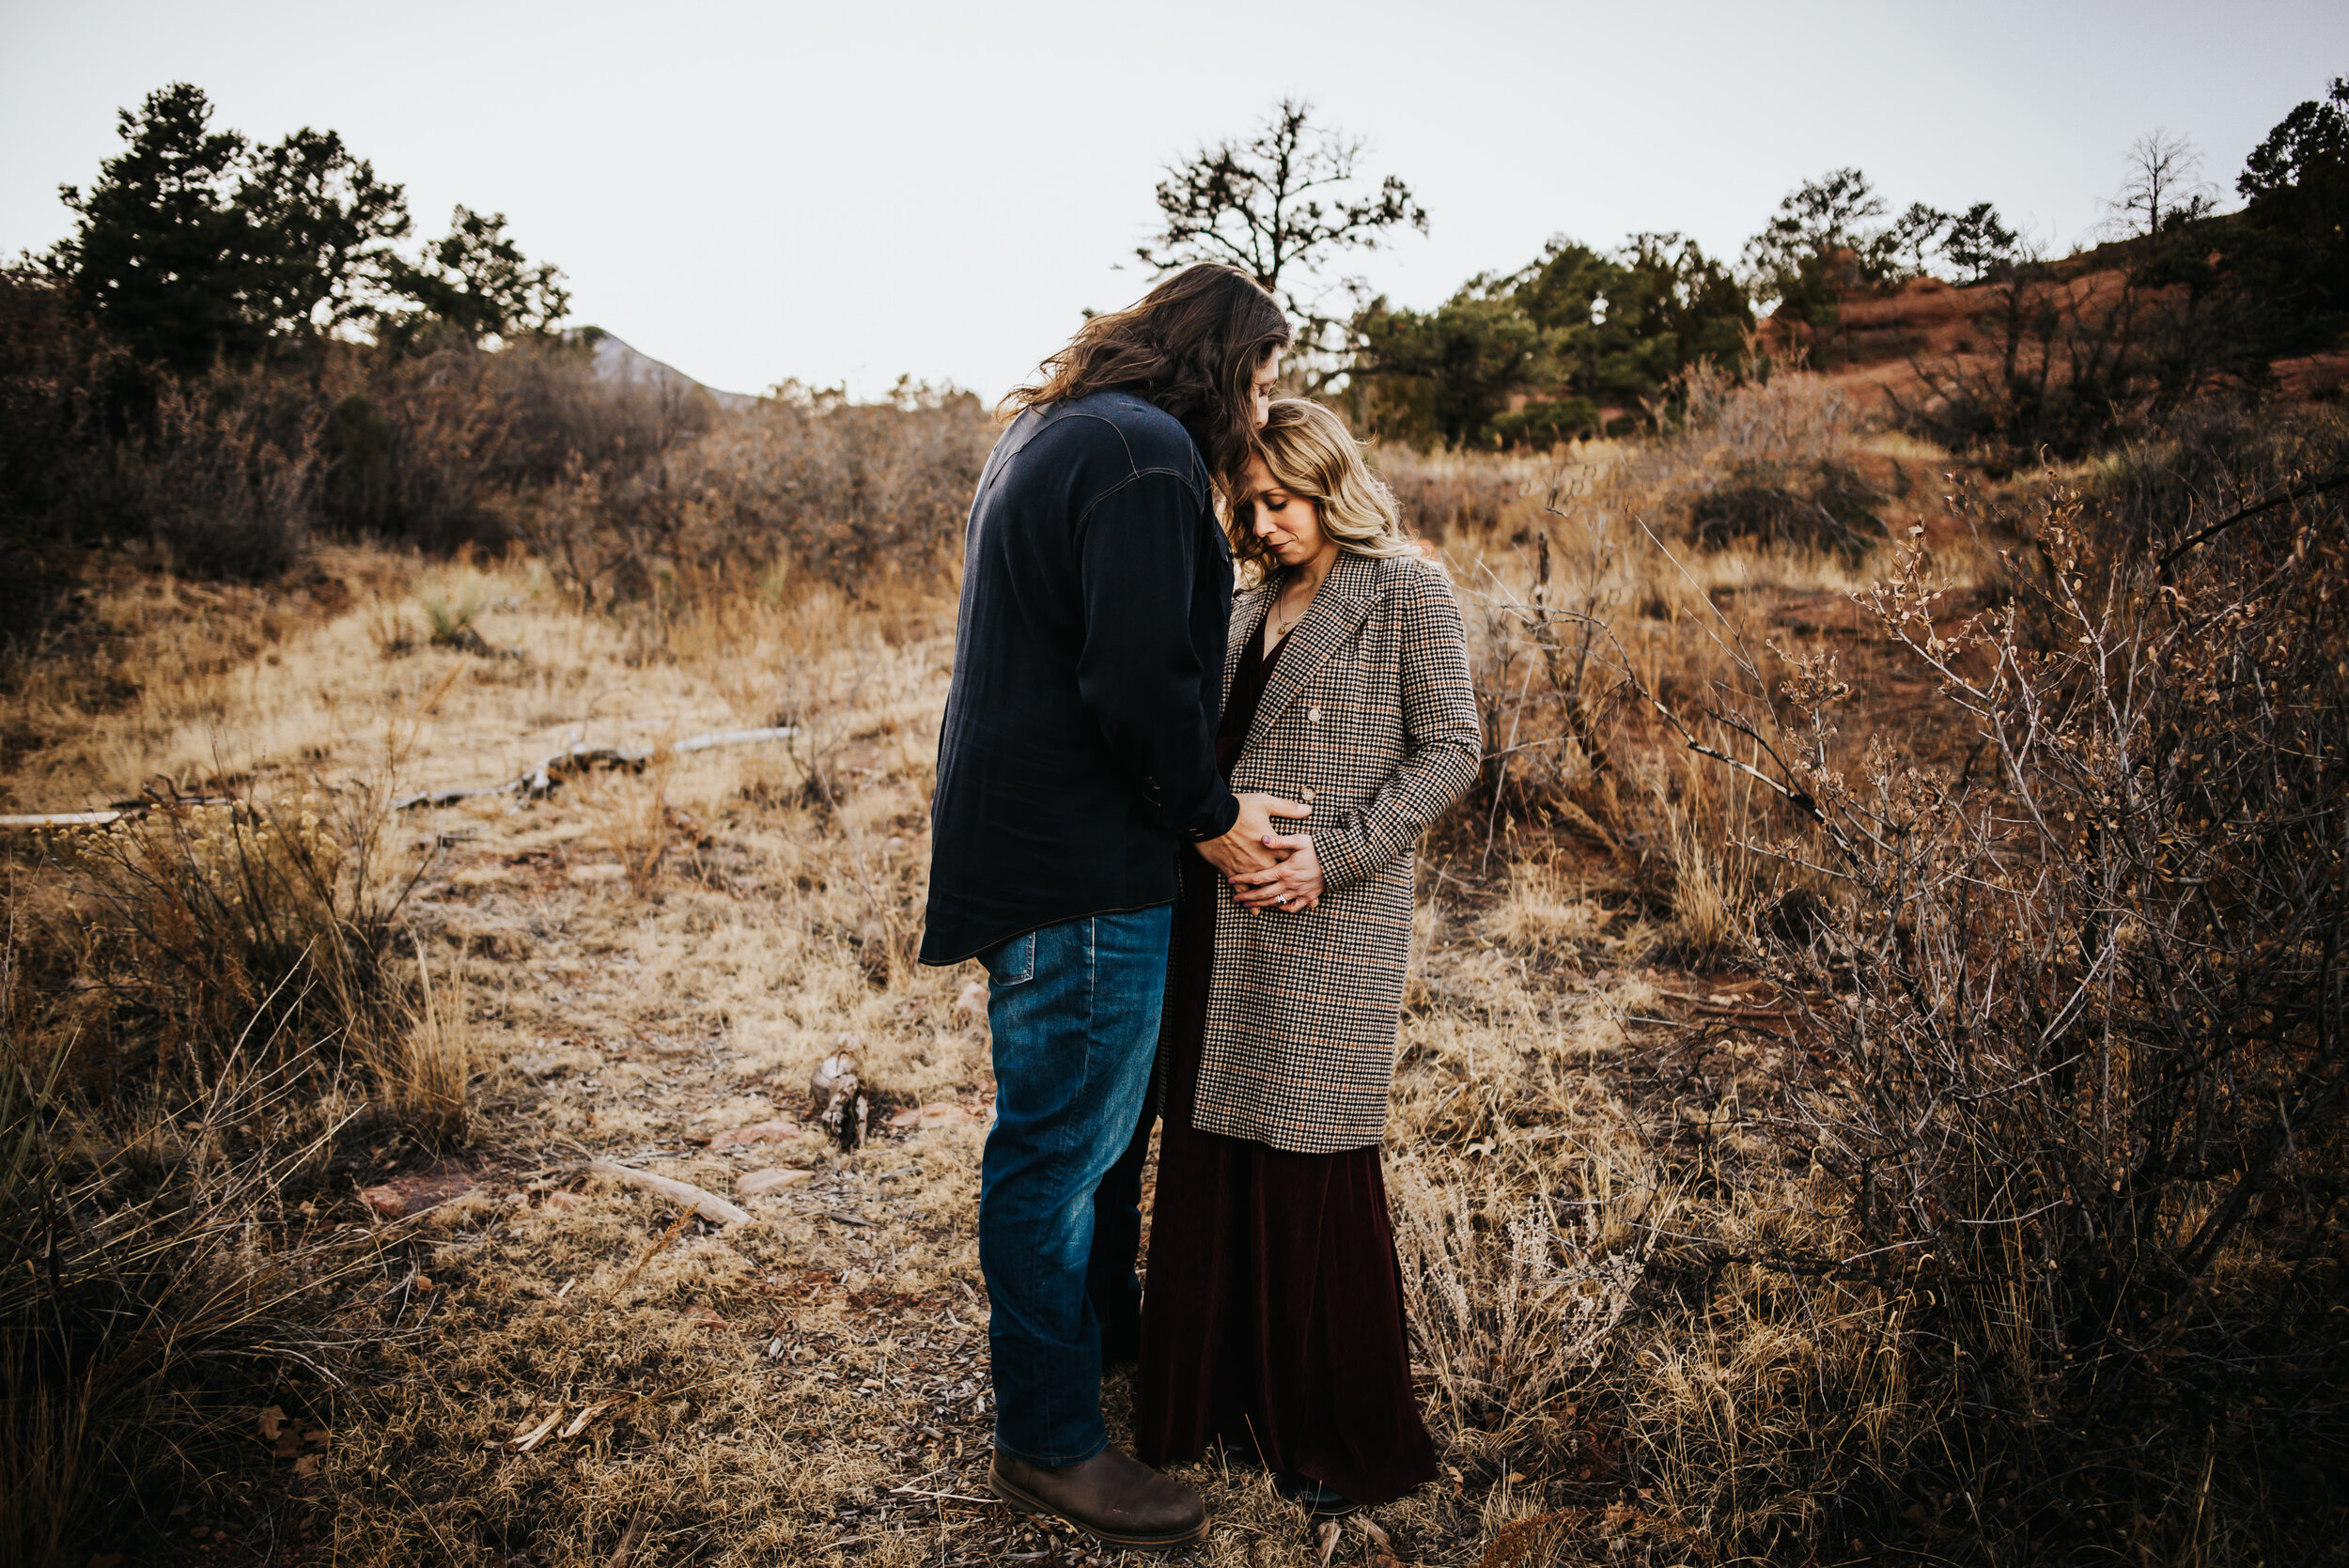 Laura Maternity Session Colorado Springs Sunset Garden of the Gods Husband Wife Wild Prairie Photography-13-2021.jpg